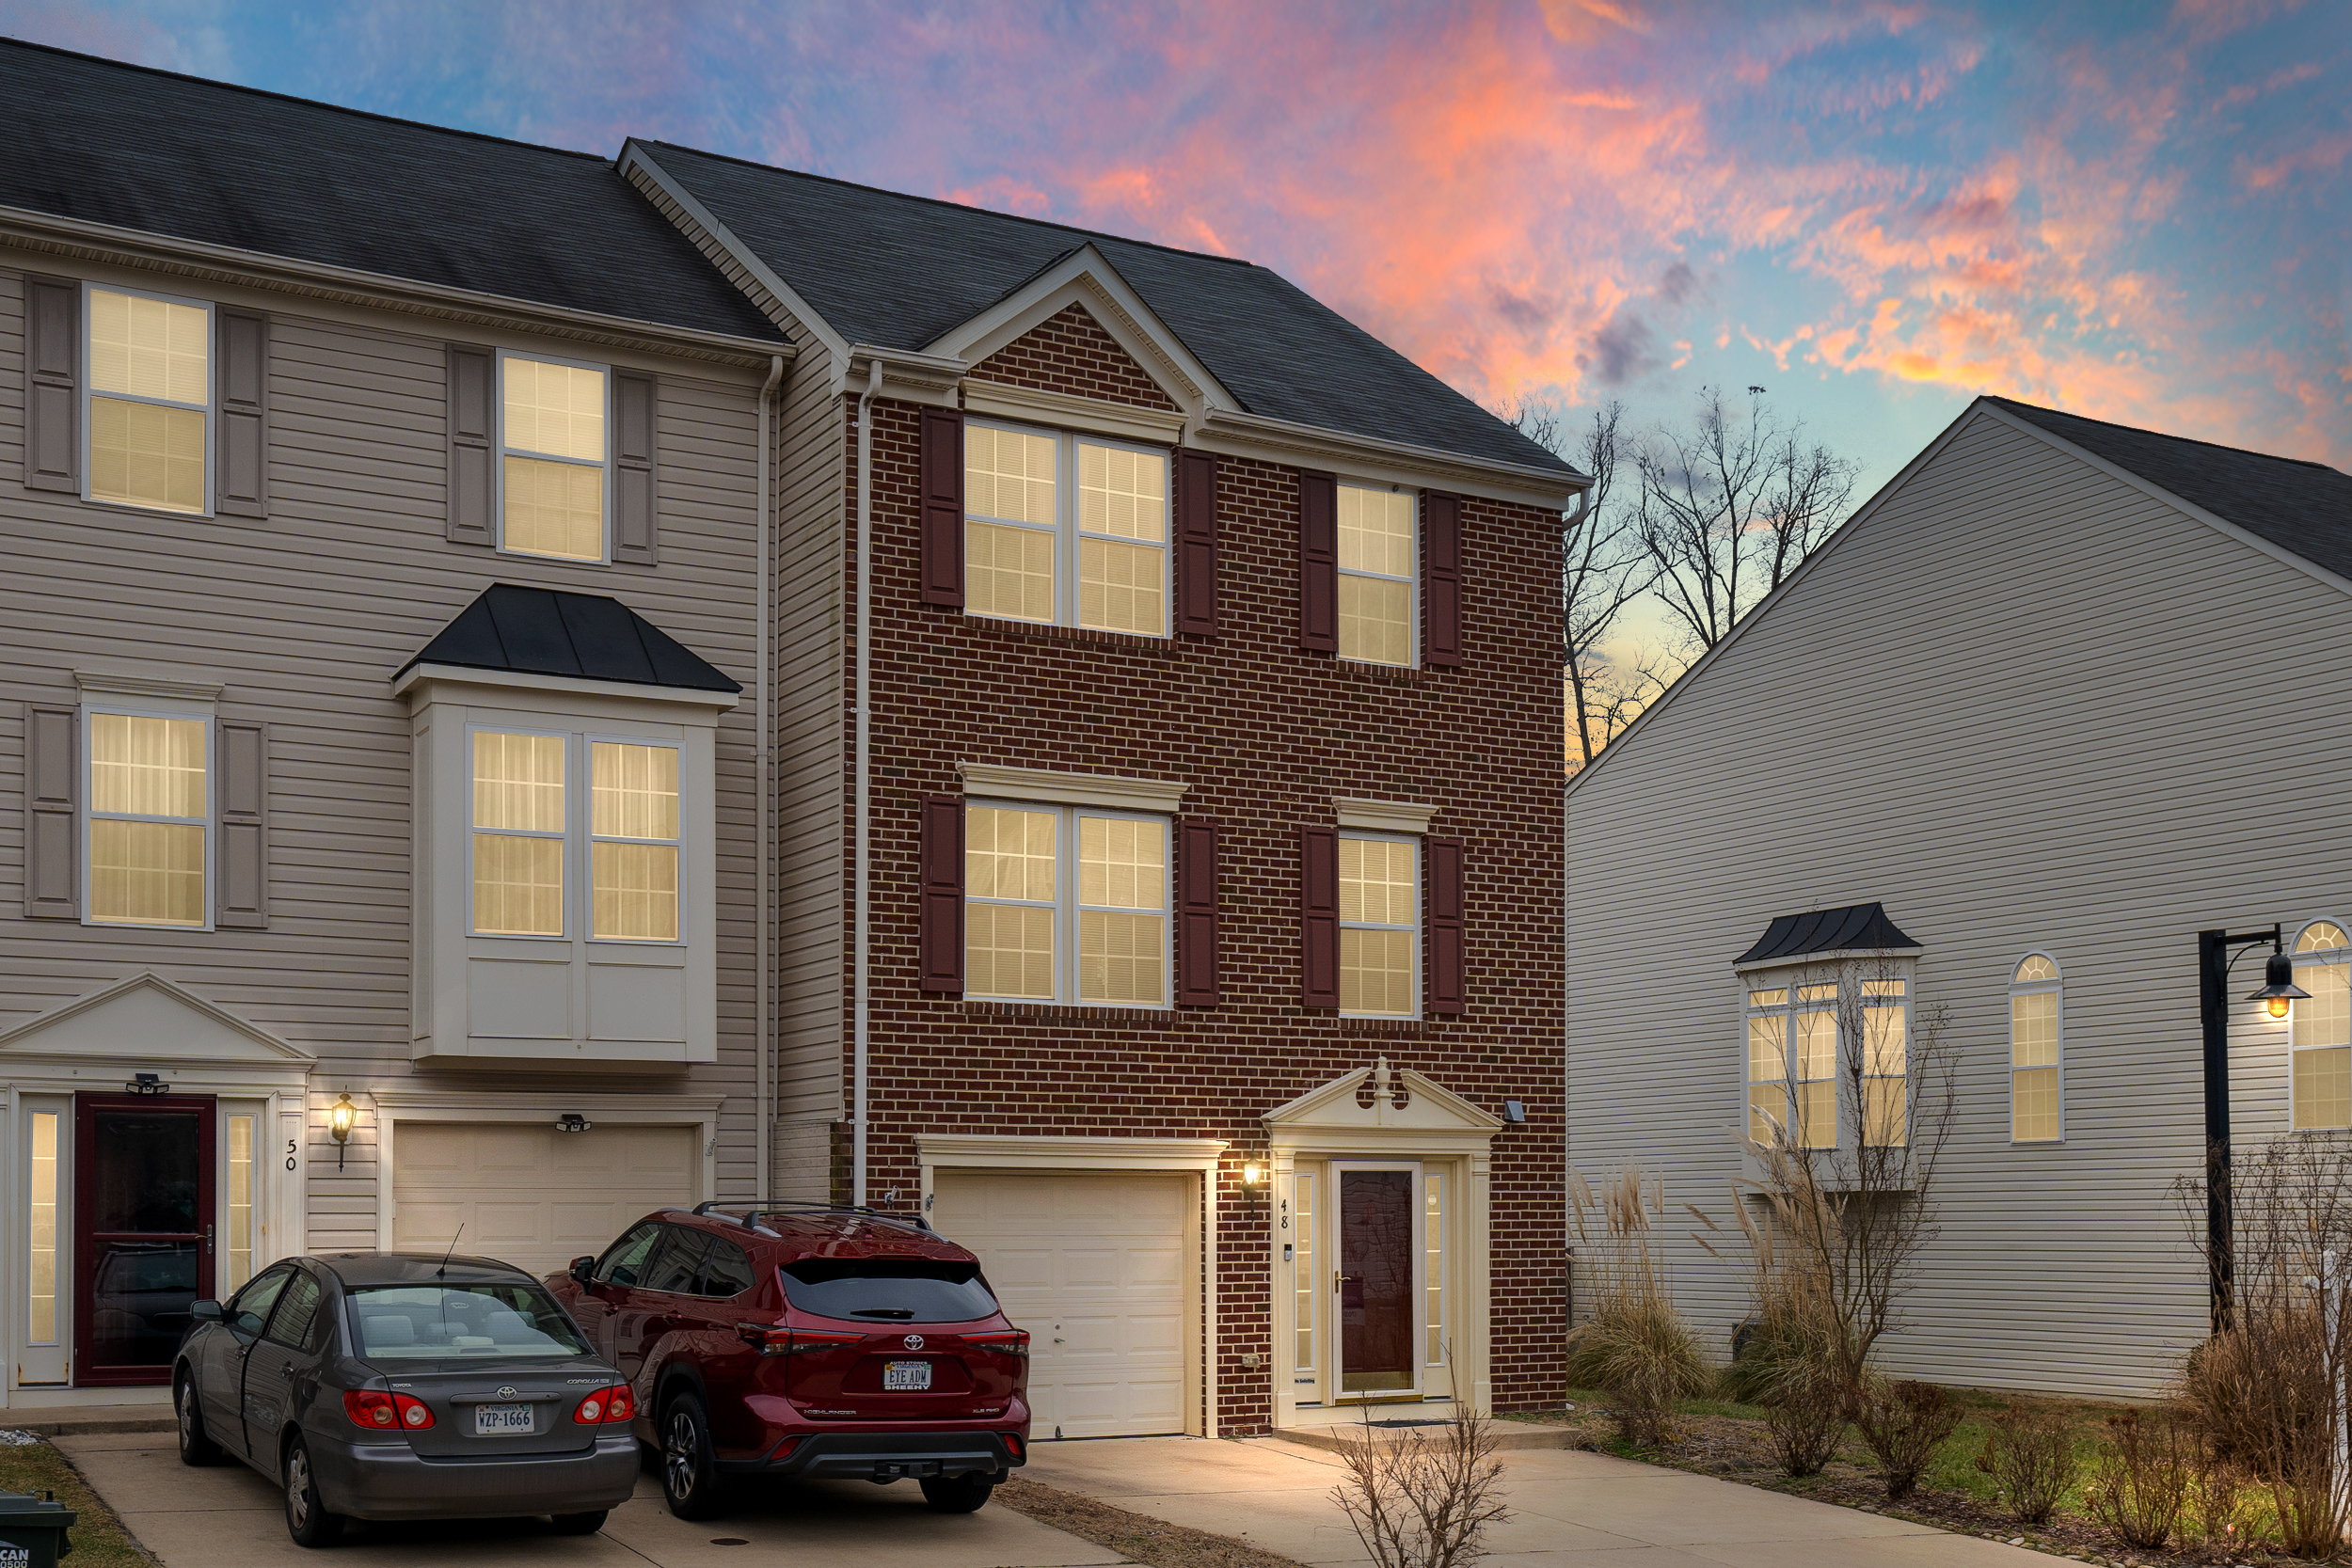 Townhome for Sale in Stafford County